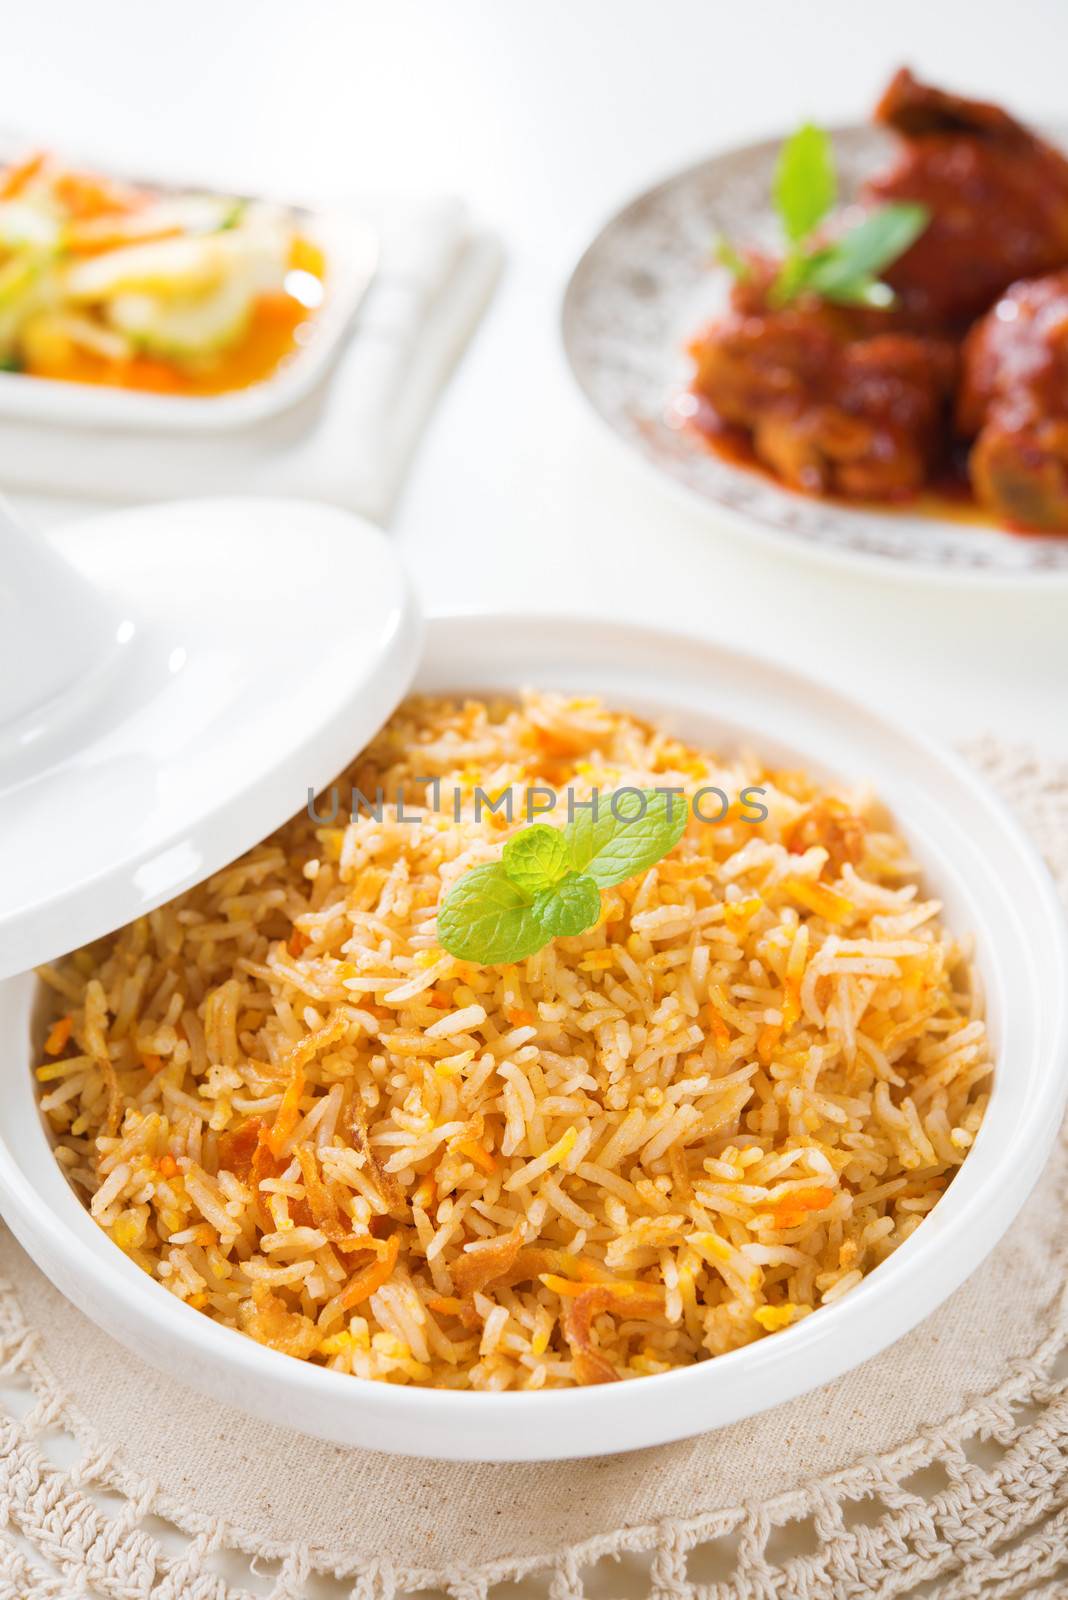 Biryani rice or briyani rice, curry chicken and salad, traditional indian food on dining table.